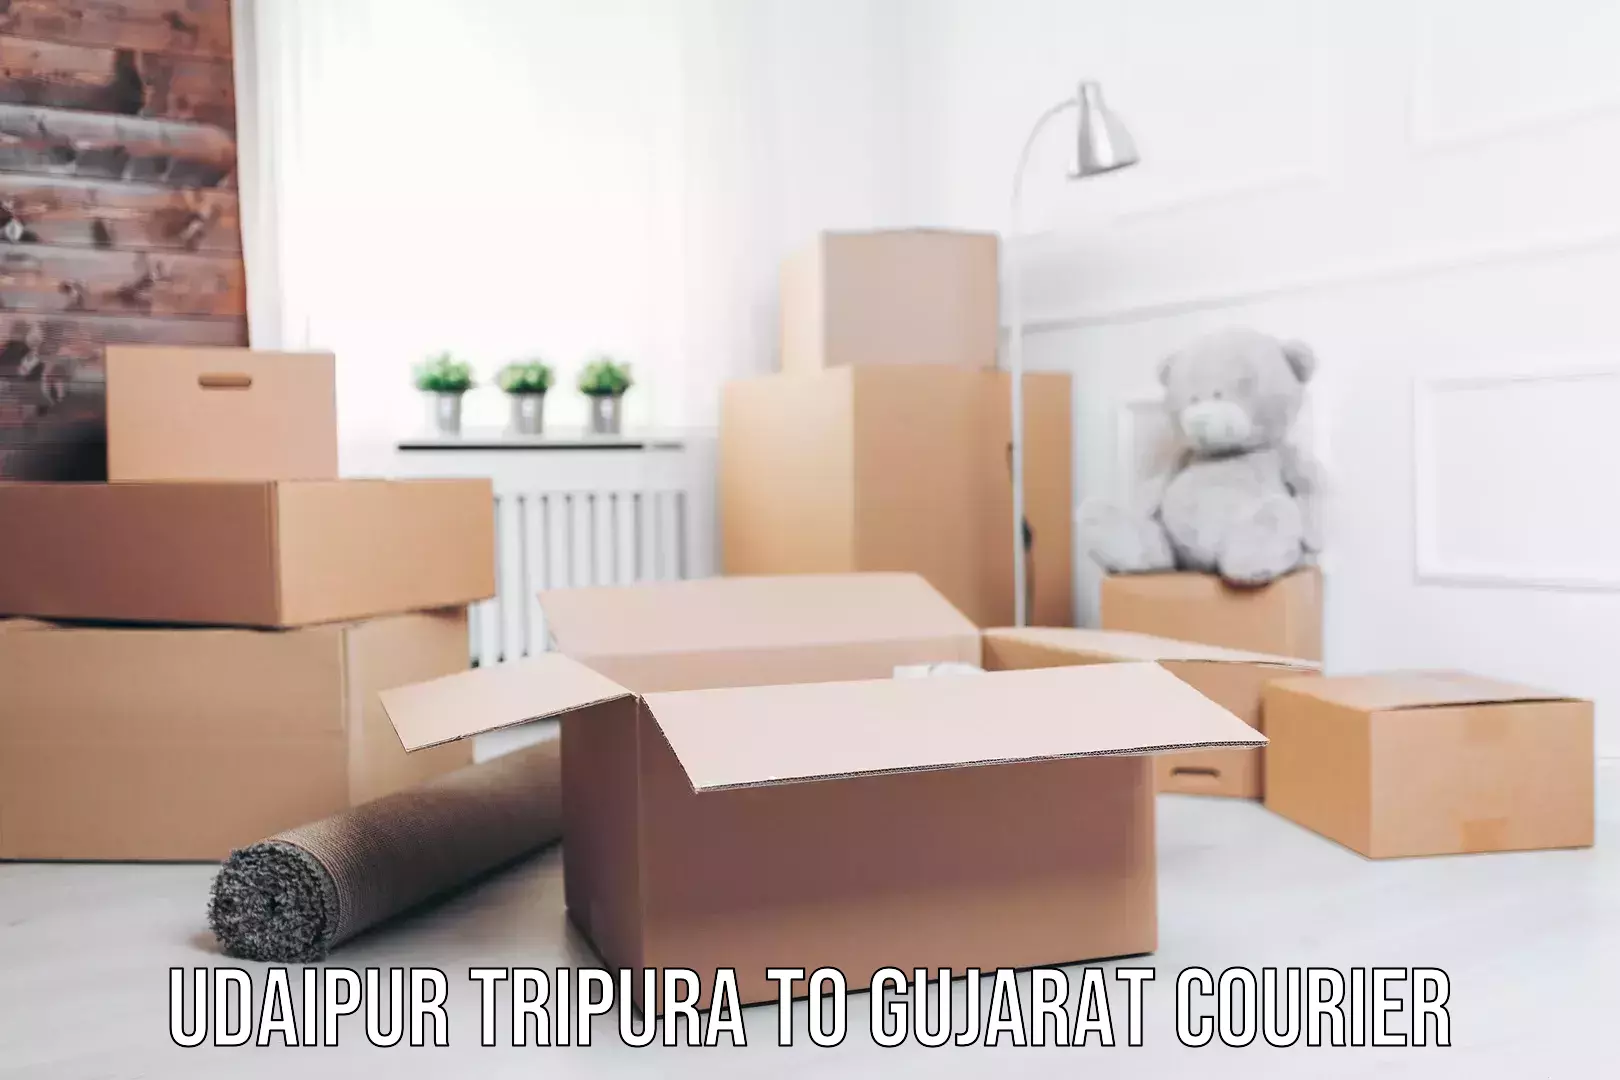 Easy access courier services Udaipur Tripura to Gujarat